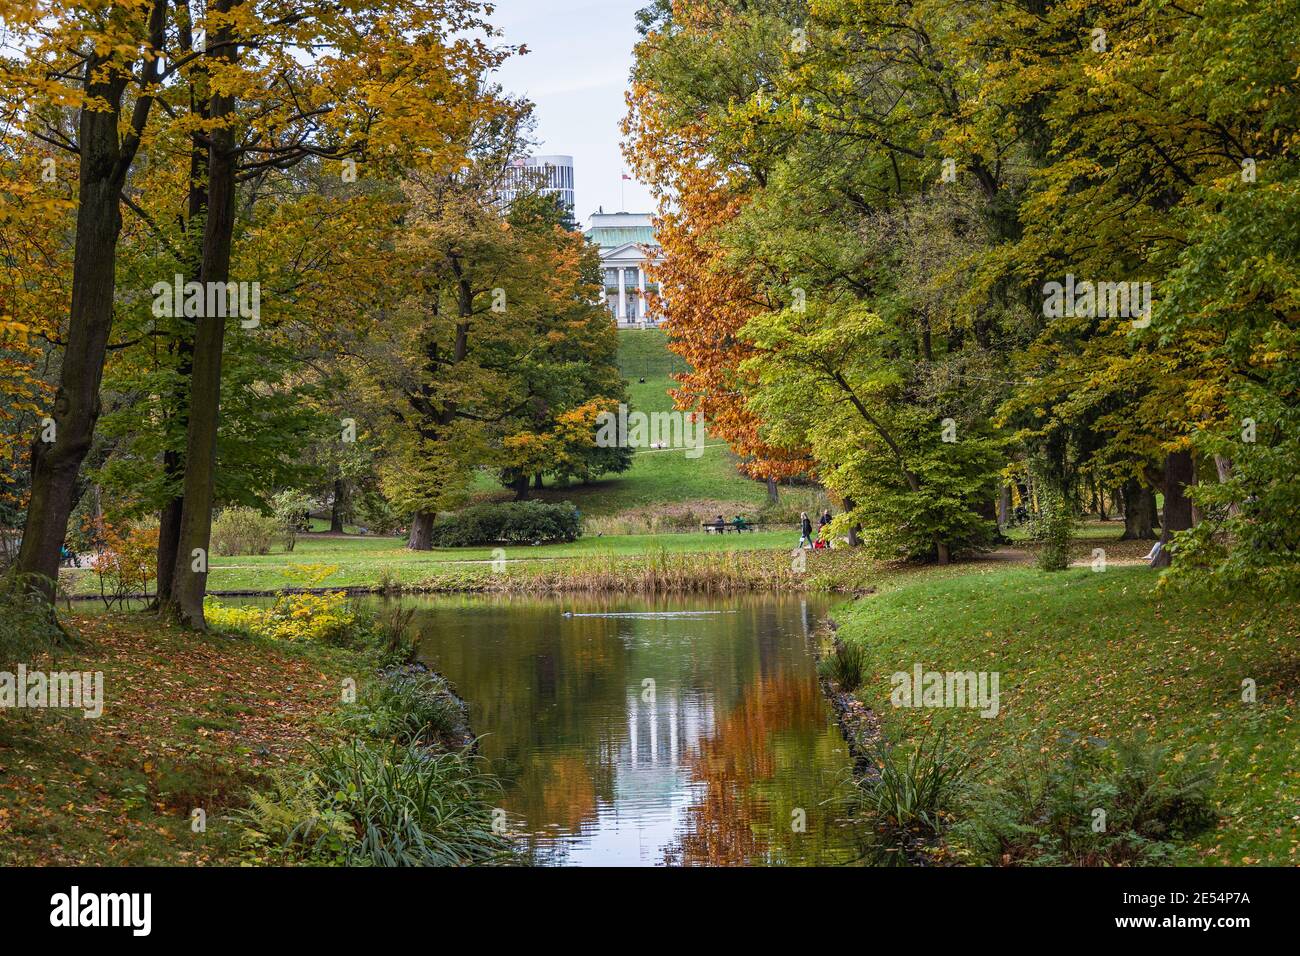 Lazienkowski Park also called Lazienki Park - Royal Baths, largest park in Warsaw city, Poland, view with Belvedere Palace Stock Photo